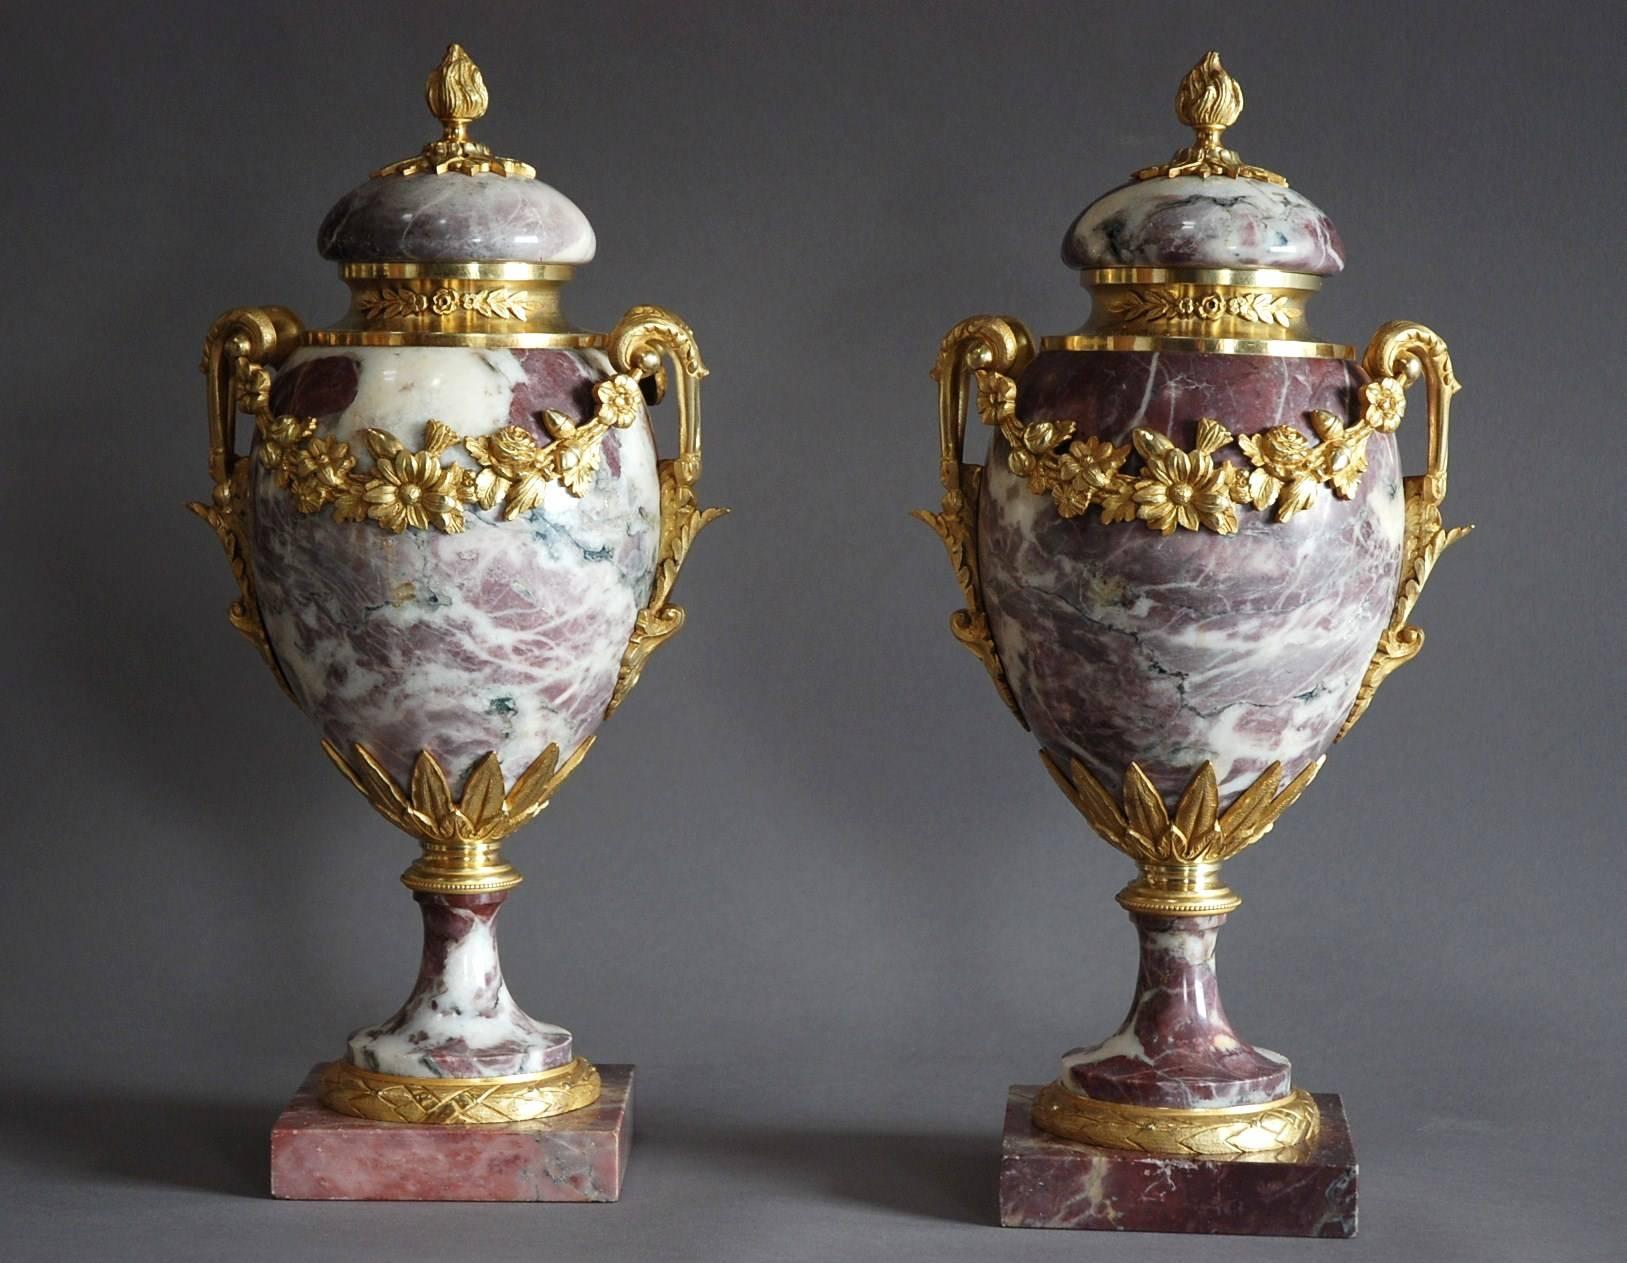 A superb pair of late 19th century fine quality Breche Violette marble cassolettes with finely chased ormolu-mounts in the Louis XVI style.

The cassolettes consist of removable marble lids with ormolu finial decoration to the top in the form of